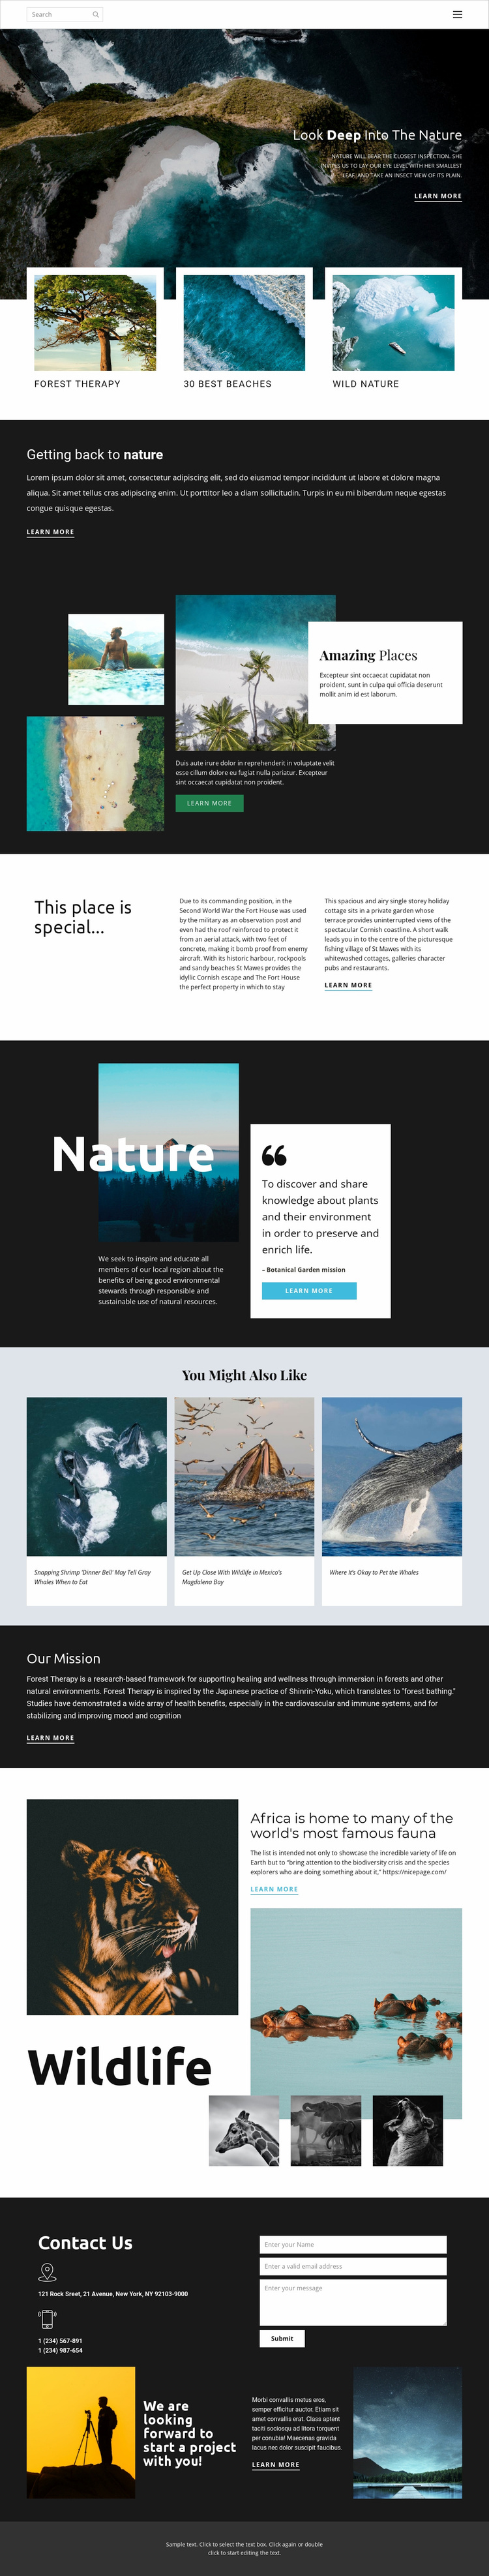 Exploring wildlife and nature Website Template